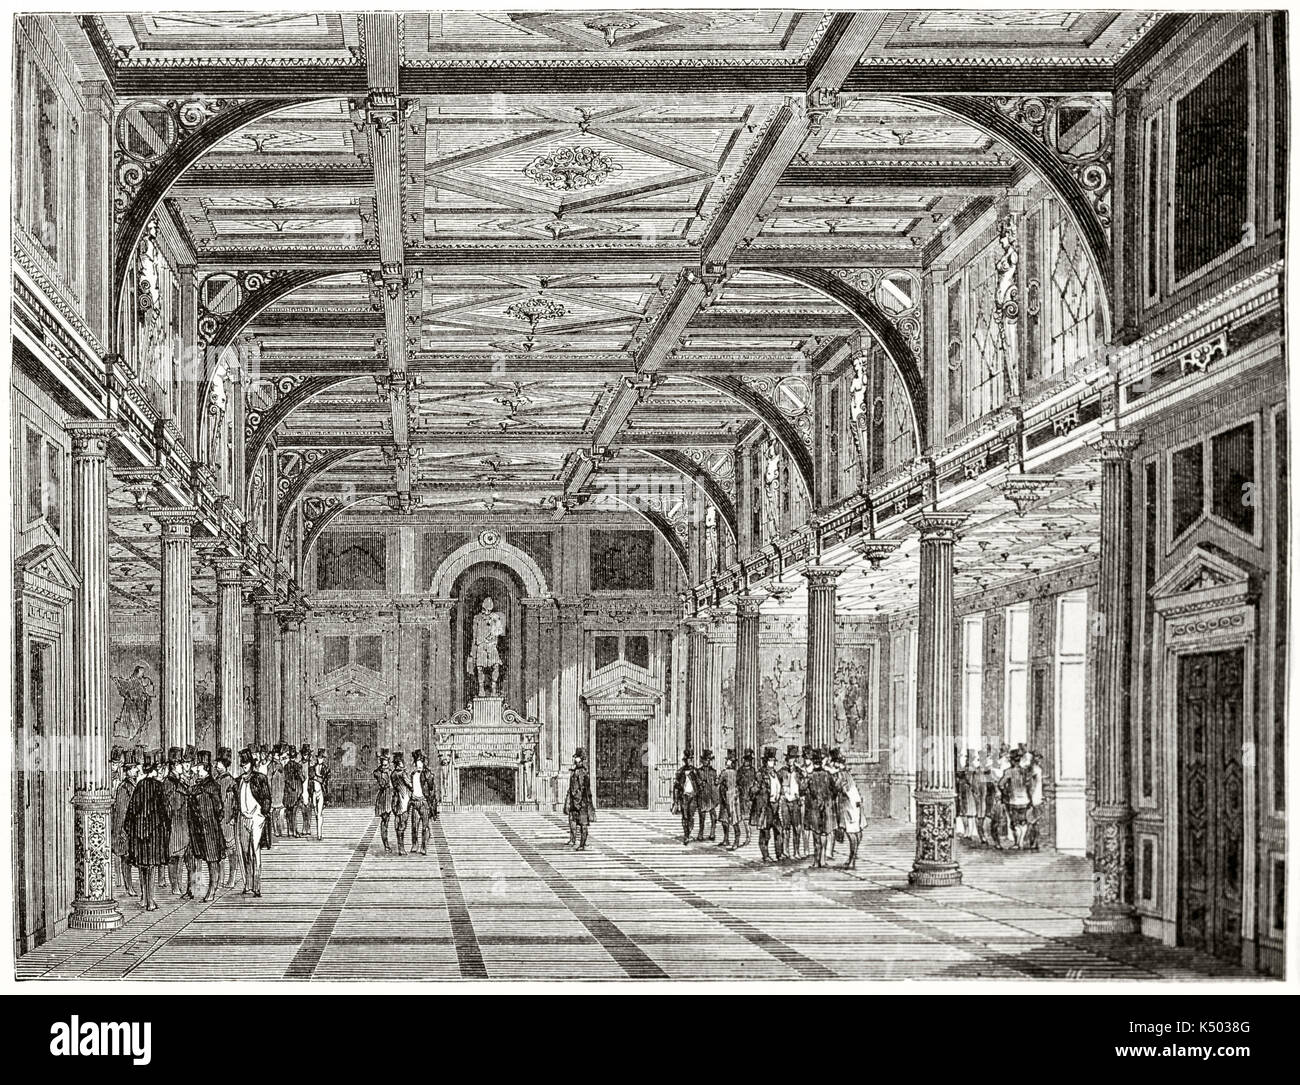 Frontal perspective view of an ancient big luxury room with high coffered ceiling and columns. Exchange hall in the Old Stock-Exchange in Copenhagen Denmark. By Therond on Le Tour du Monde Paris 1862 Stock Photo